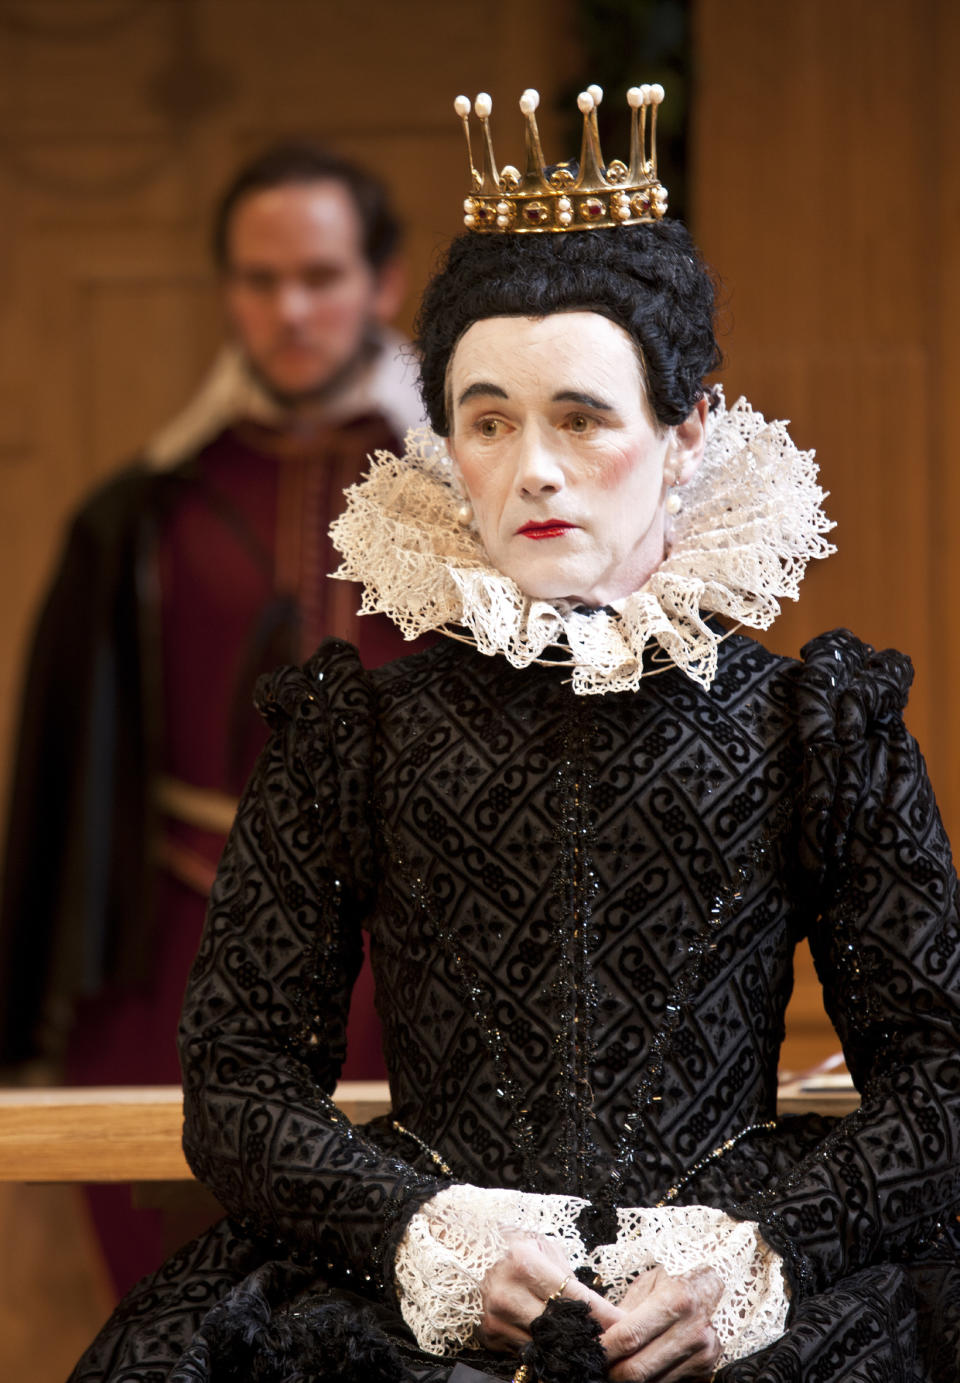 In this image provided Monday Nov. 19, 2012 by Sonia Friedman Productions, Mark Rylance, as the character Olivia, during a dress rehearsal in Twelfth Night at a London theatre, Nov. 1, 2012. Mark Rylance's latest London performances are hot tickets, and not just because he is one of Britain's leading Shakespearean actors. It's a chance to see him in two wildly contrasting roles, the scheming usurper dispatching everyone who stands between him and the throne in "Richard III," and the aloof countess Olivia, blindsided by love, in the boisterous comedy "Twelfth Night." (AP Photo/Simon Annand, Sonia Friedman Productions)